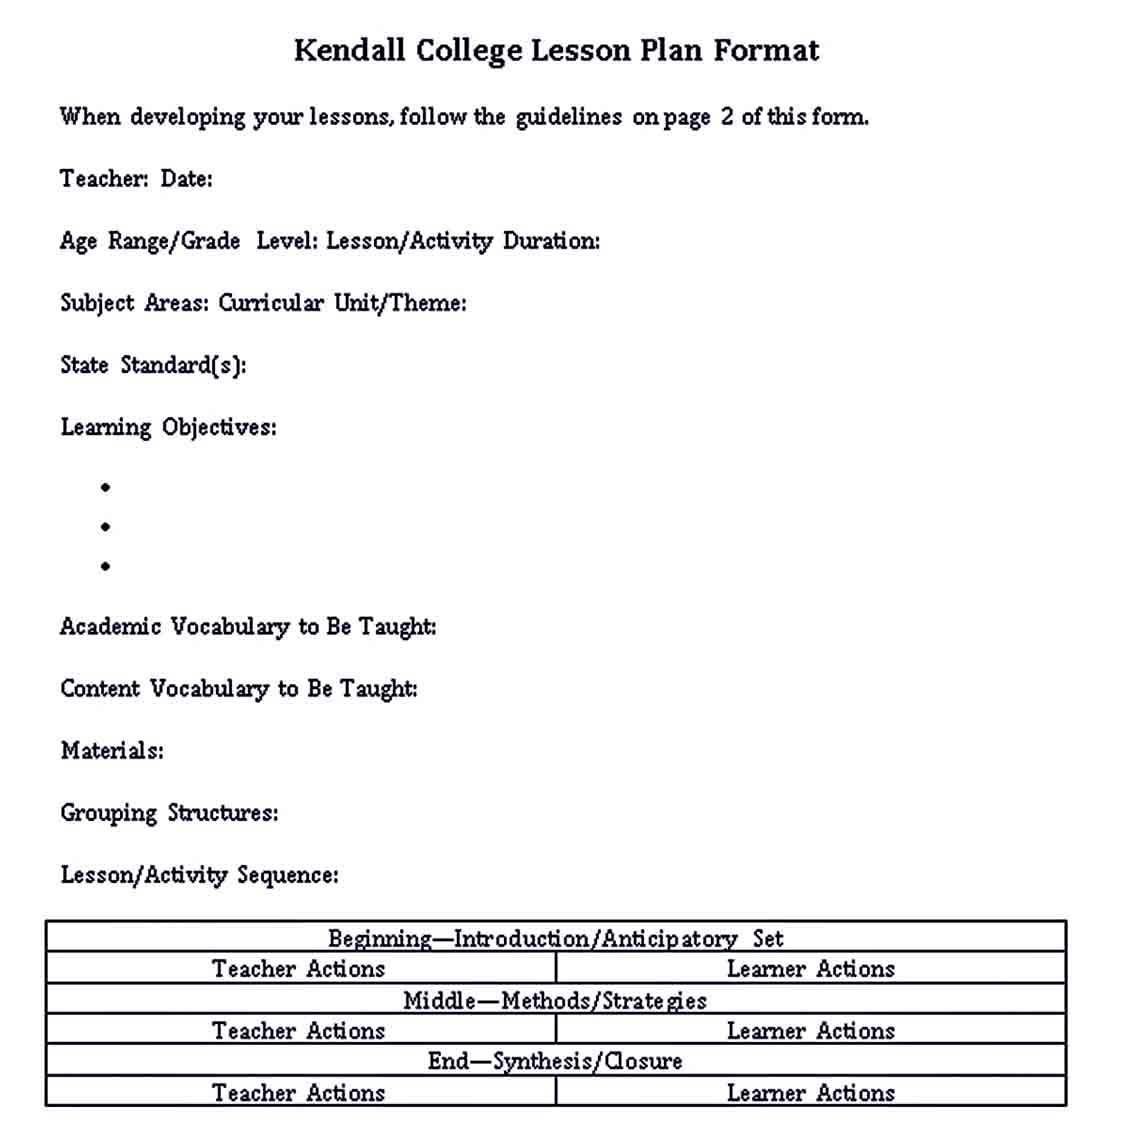 Lesson Plan Template Doc  room surf.com Throughout Madeline Hunter Lesson Plan Template Word